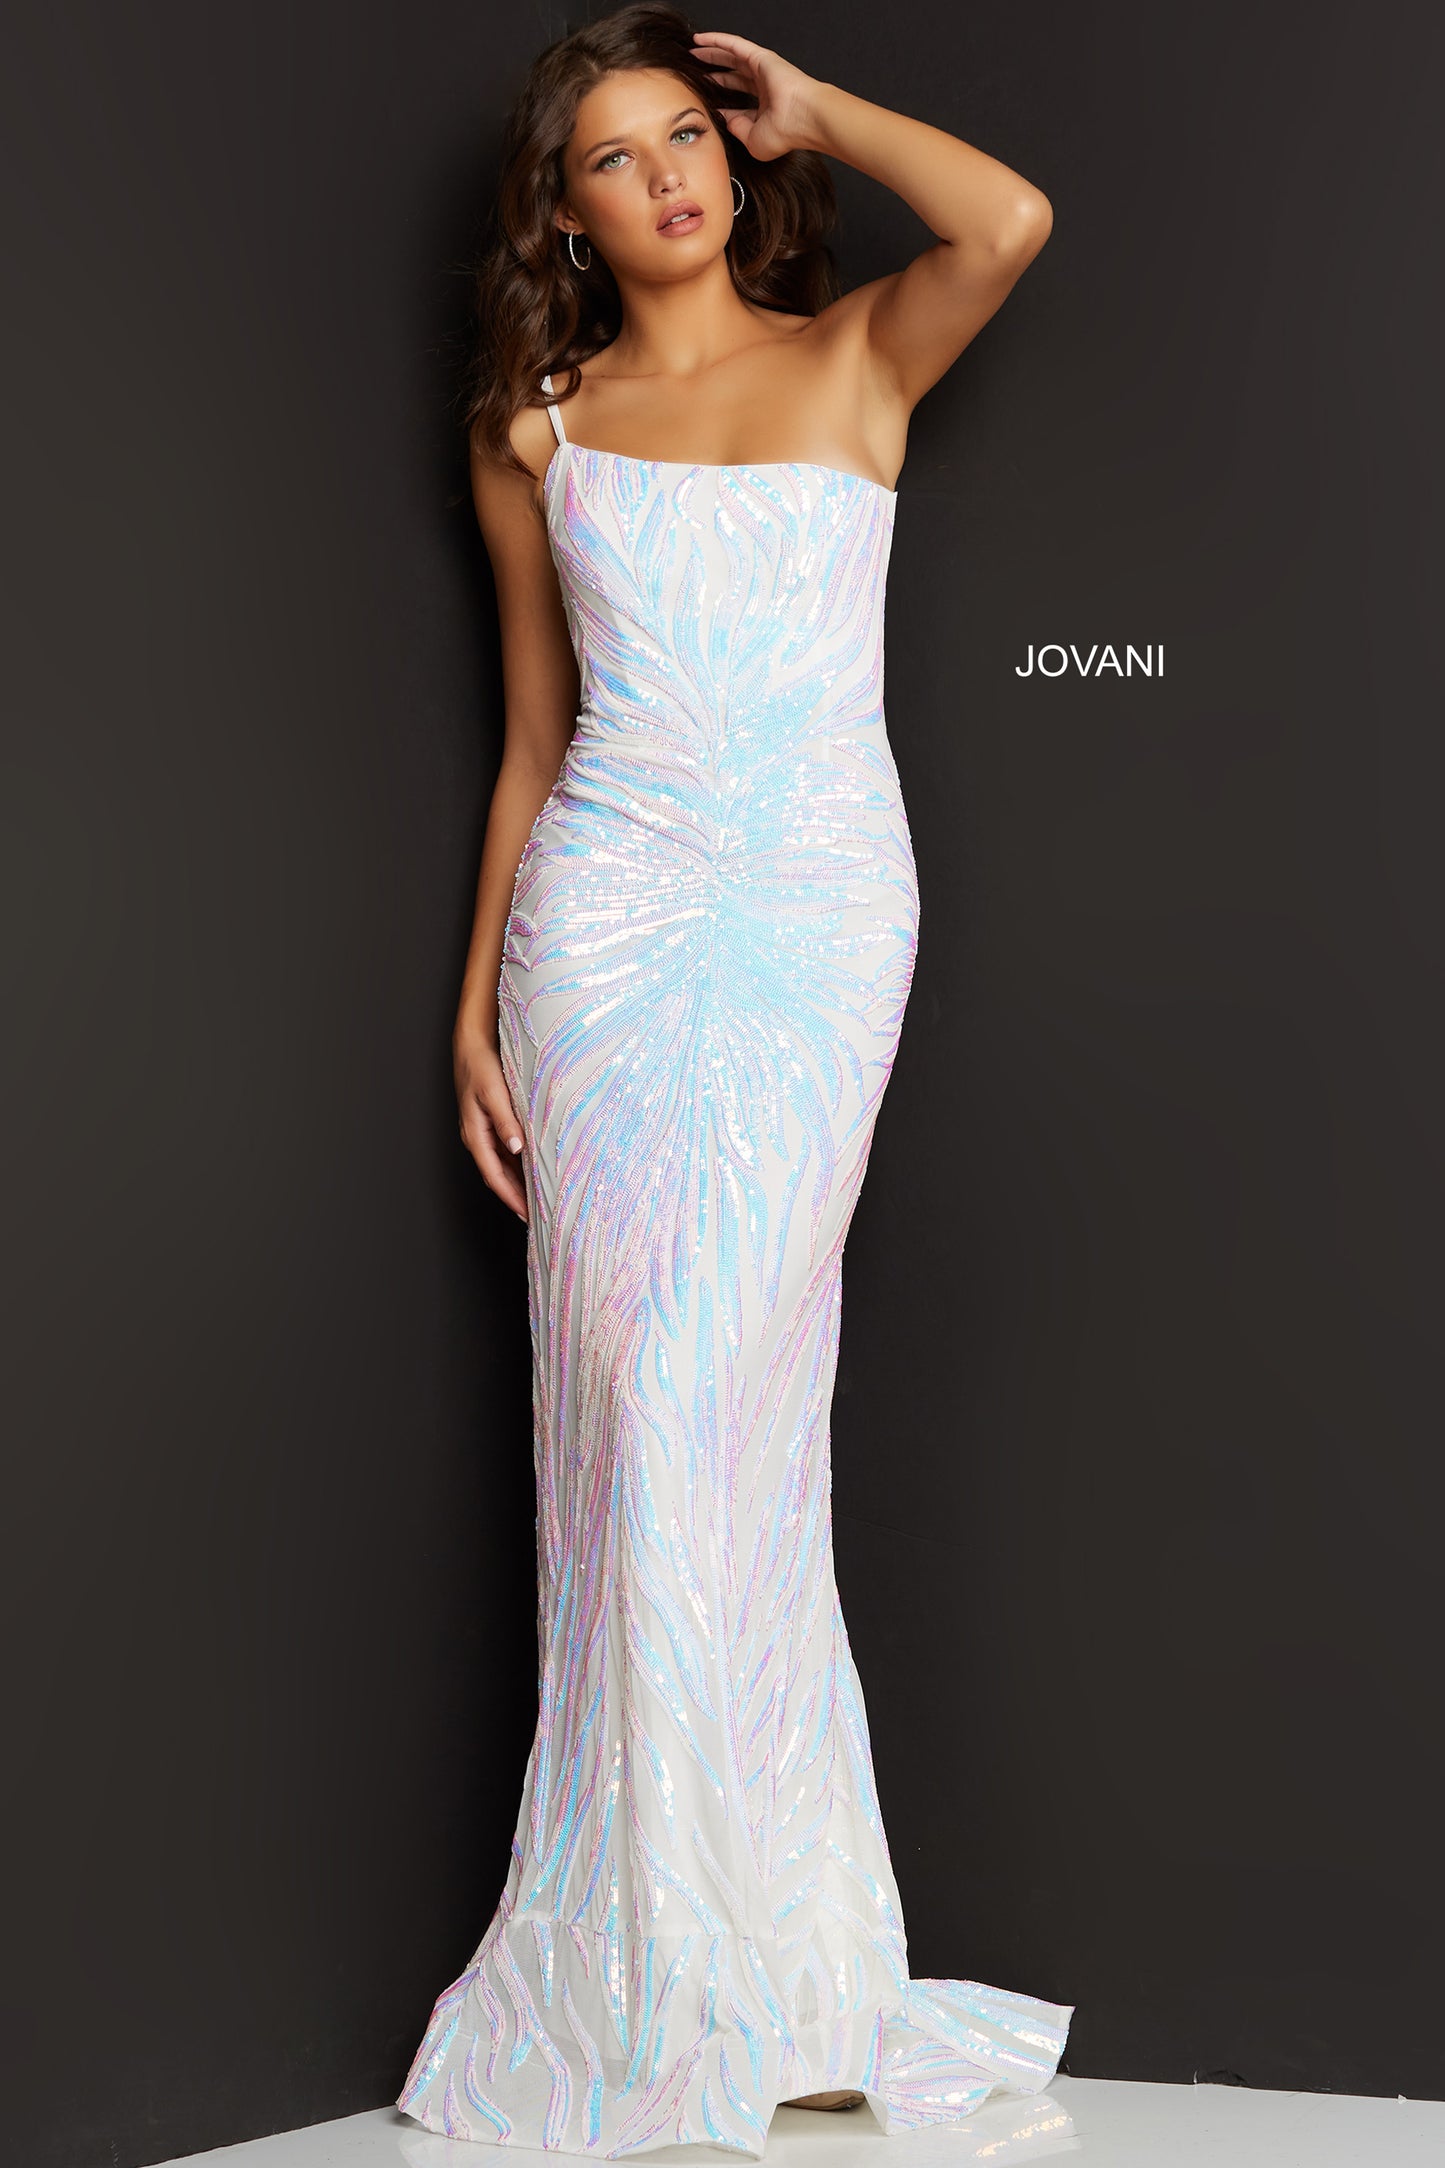 Jovani 05664 is a long fitted formal evening gown. This one shoulder Prom Dress has a Fit & Flare silhouette. Featuring Iridescent Embellished Sequin Asymmetrical  Starburst patterns that accentuate any figure! Lush sweeping train is perfect for Pageant Presence on stage!   Closure: Invisible Back Zipper with Hook and Eye Closure. Details: Sequin embellished prom gown, form-fitting silhouette, floor length, one-shoulder sleeveless bodice.